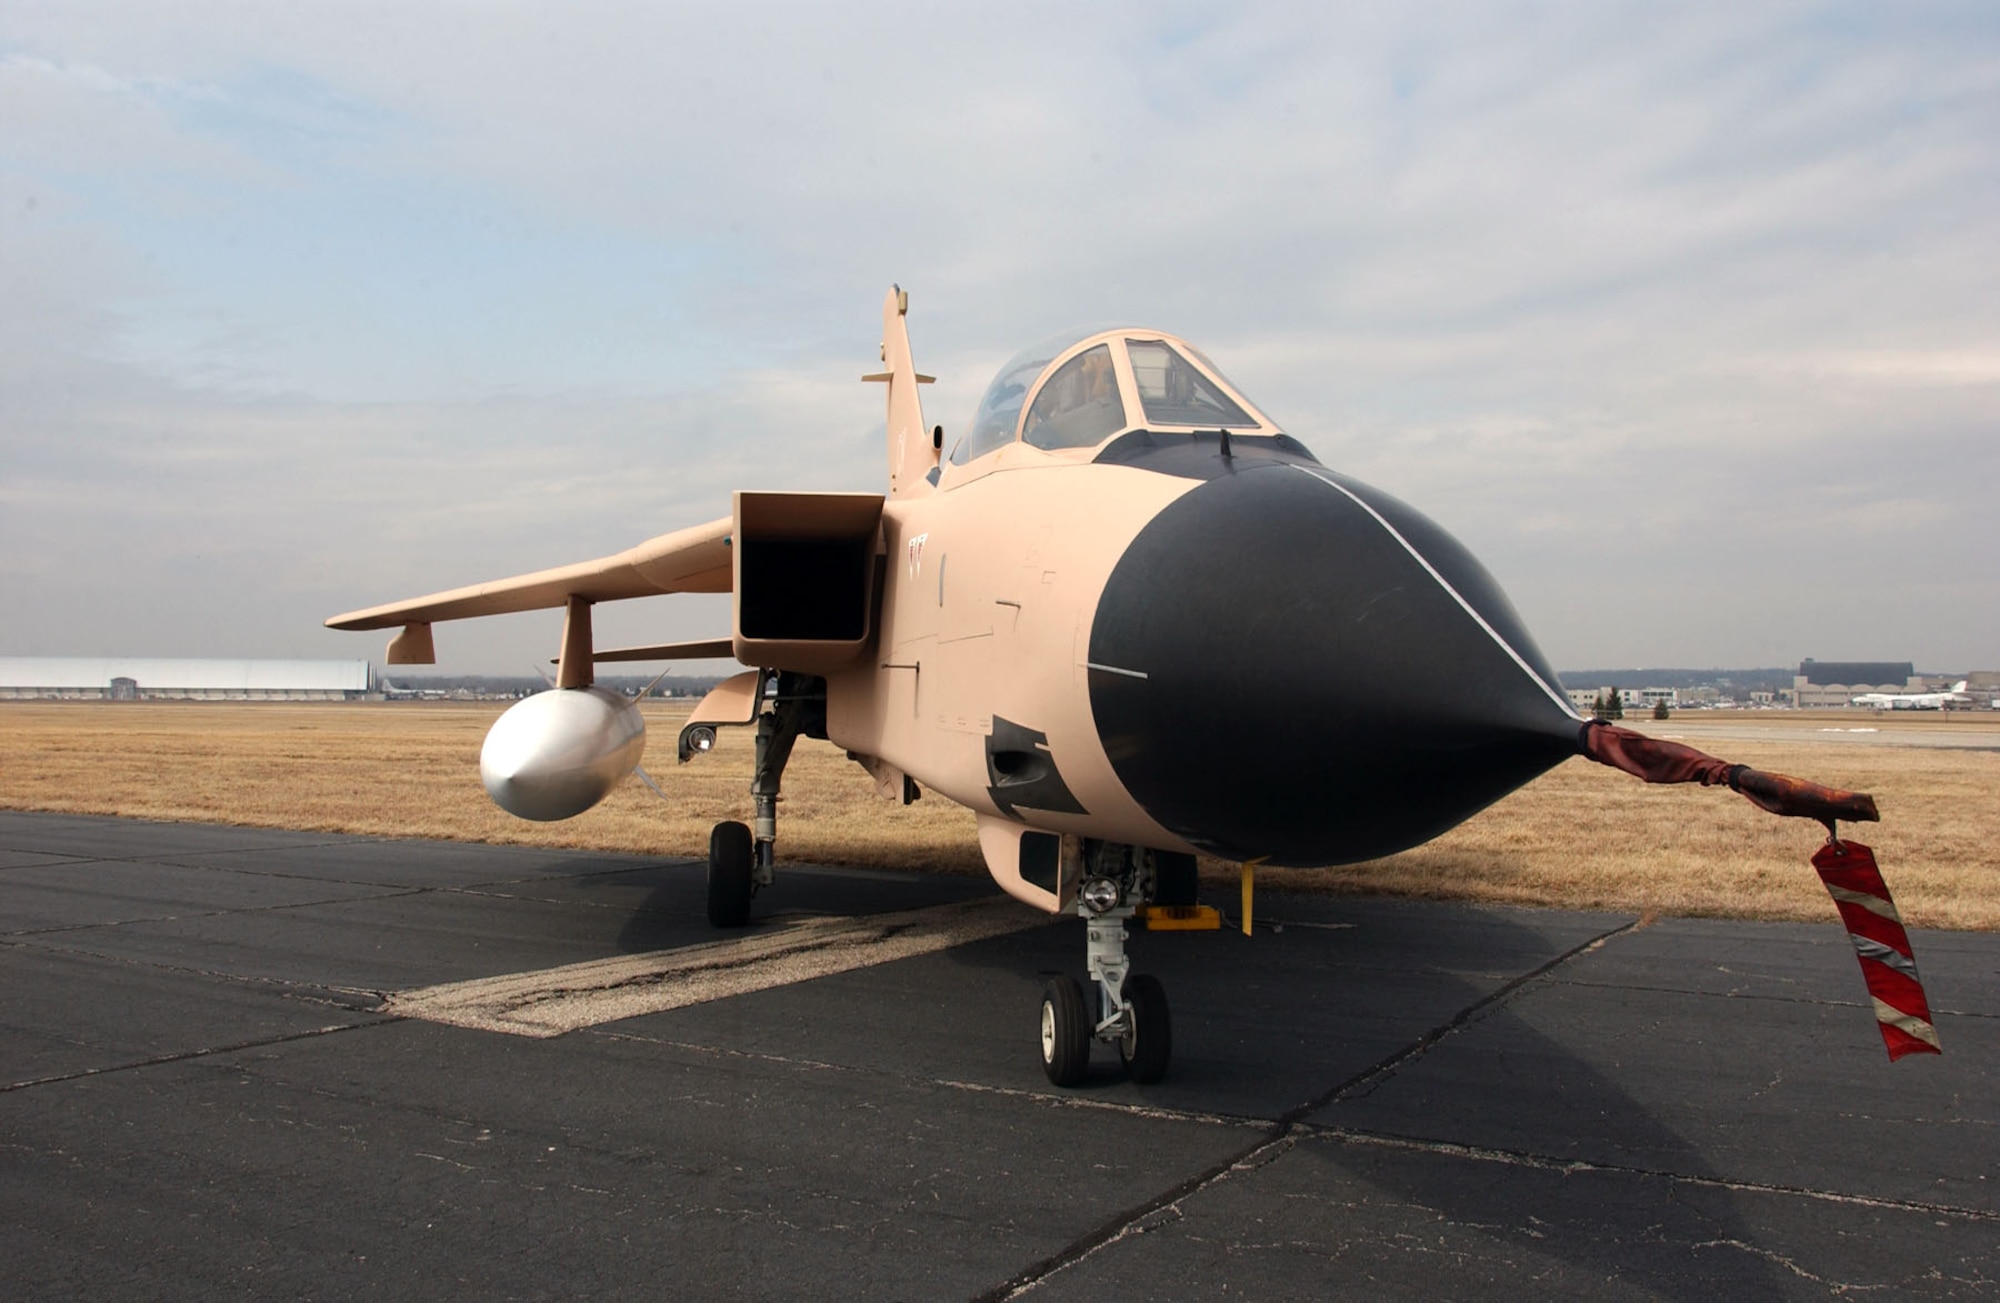 DAYTON, Ohio -- Panavia Tornado at the National Museum of the United States Air Force. (U.S. Air Force photo)